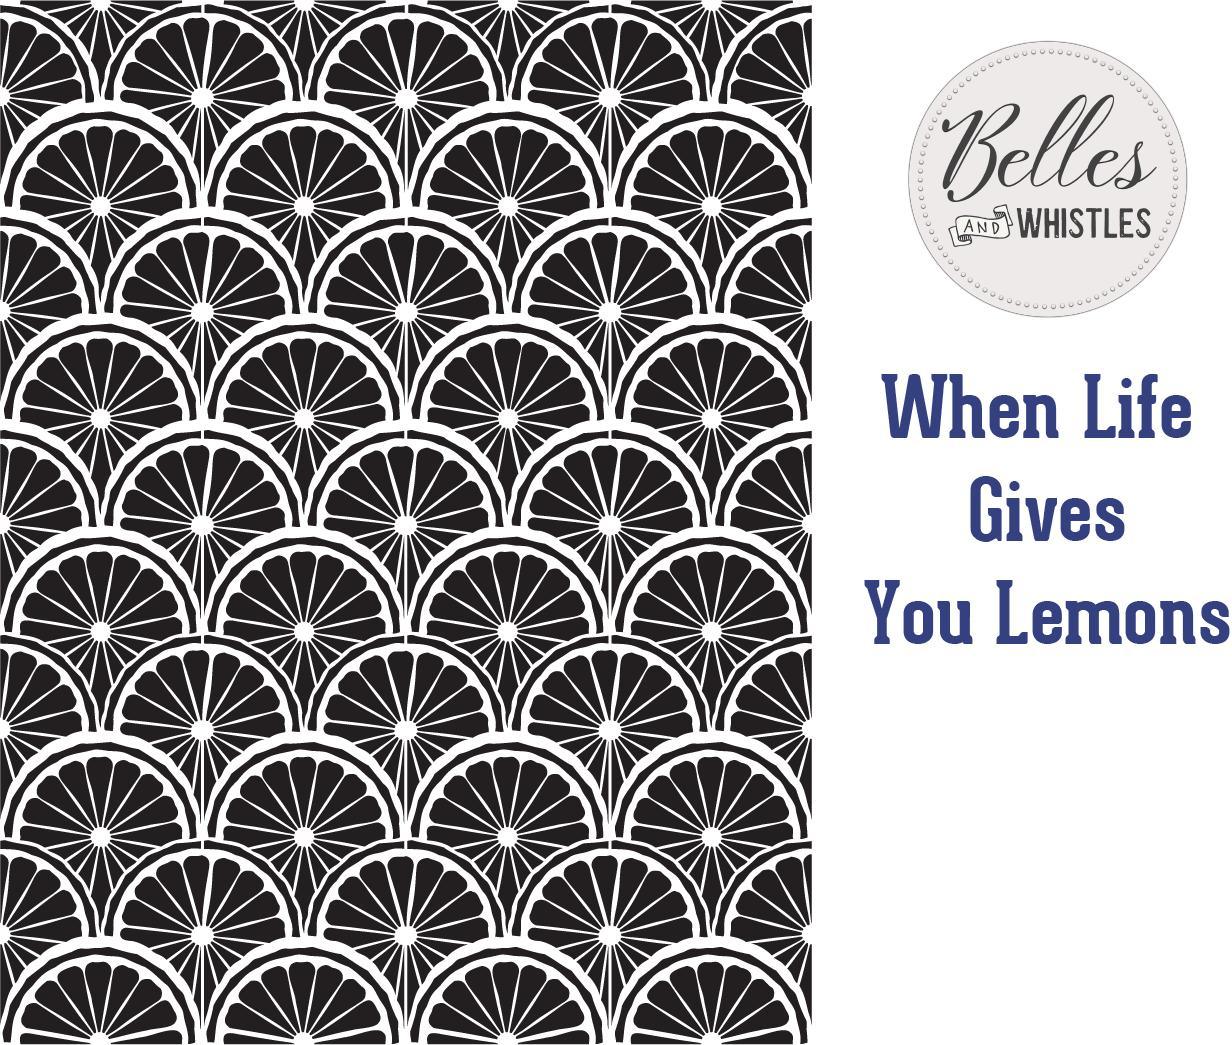 Schablone | Belles & Whistles | When Life Gives You Lemons